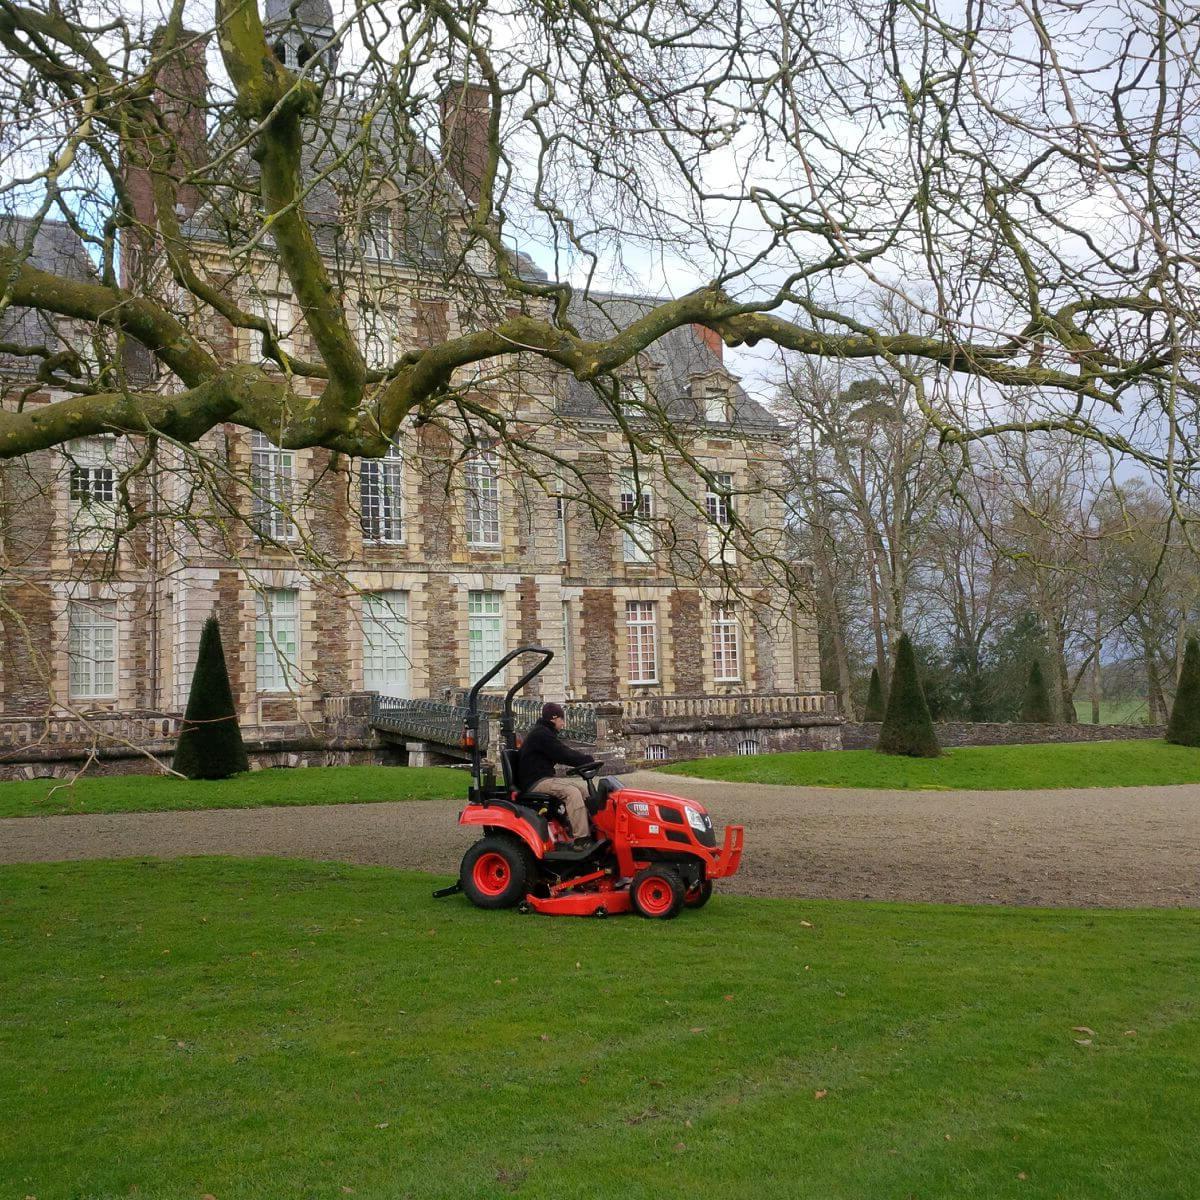 A Kioti tractor for garden maintenance in front of a big house